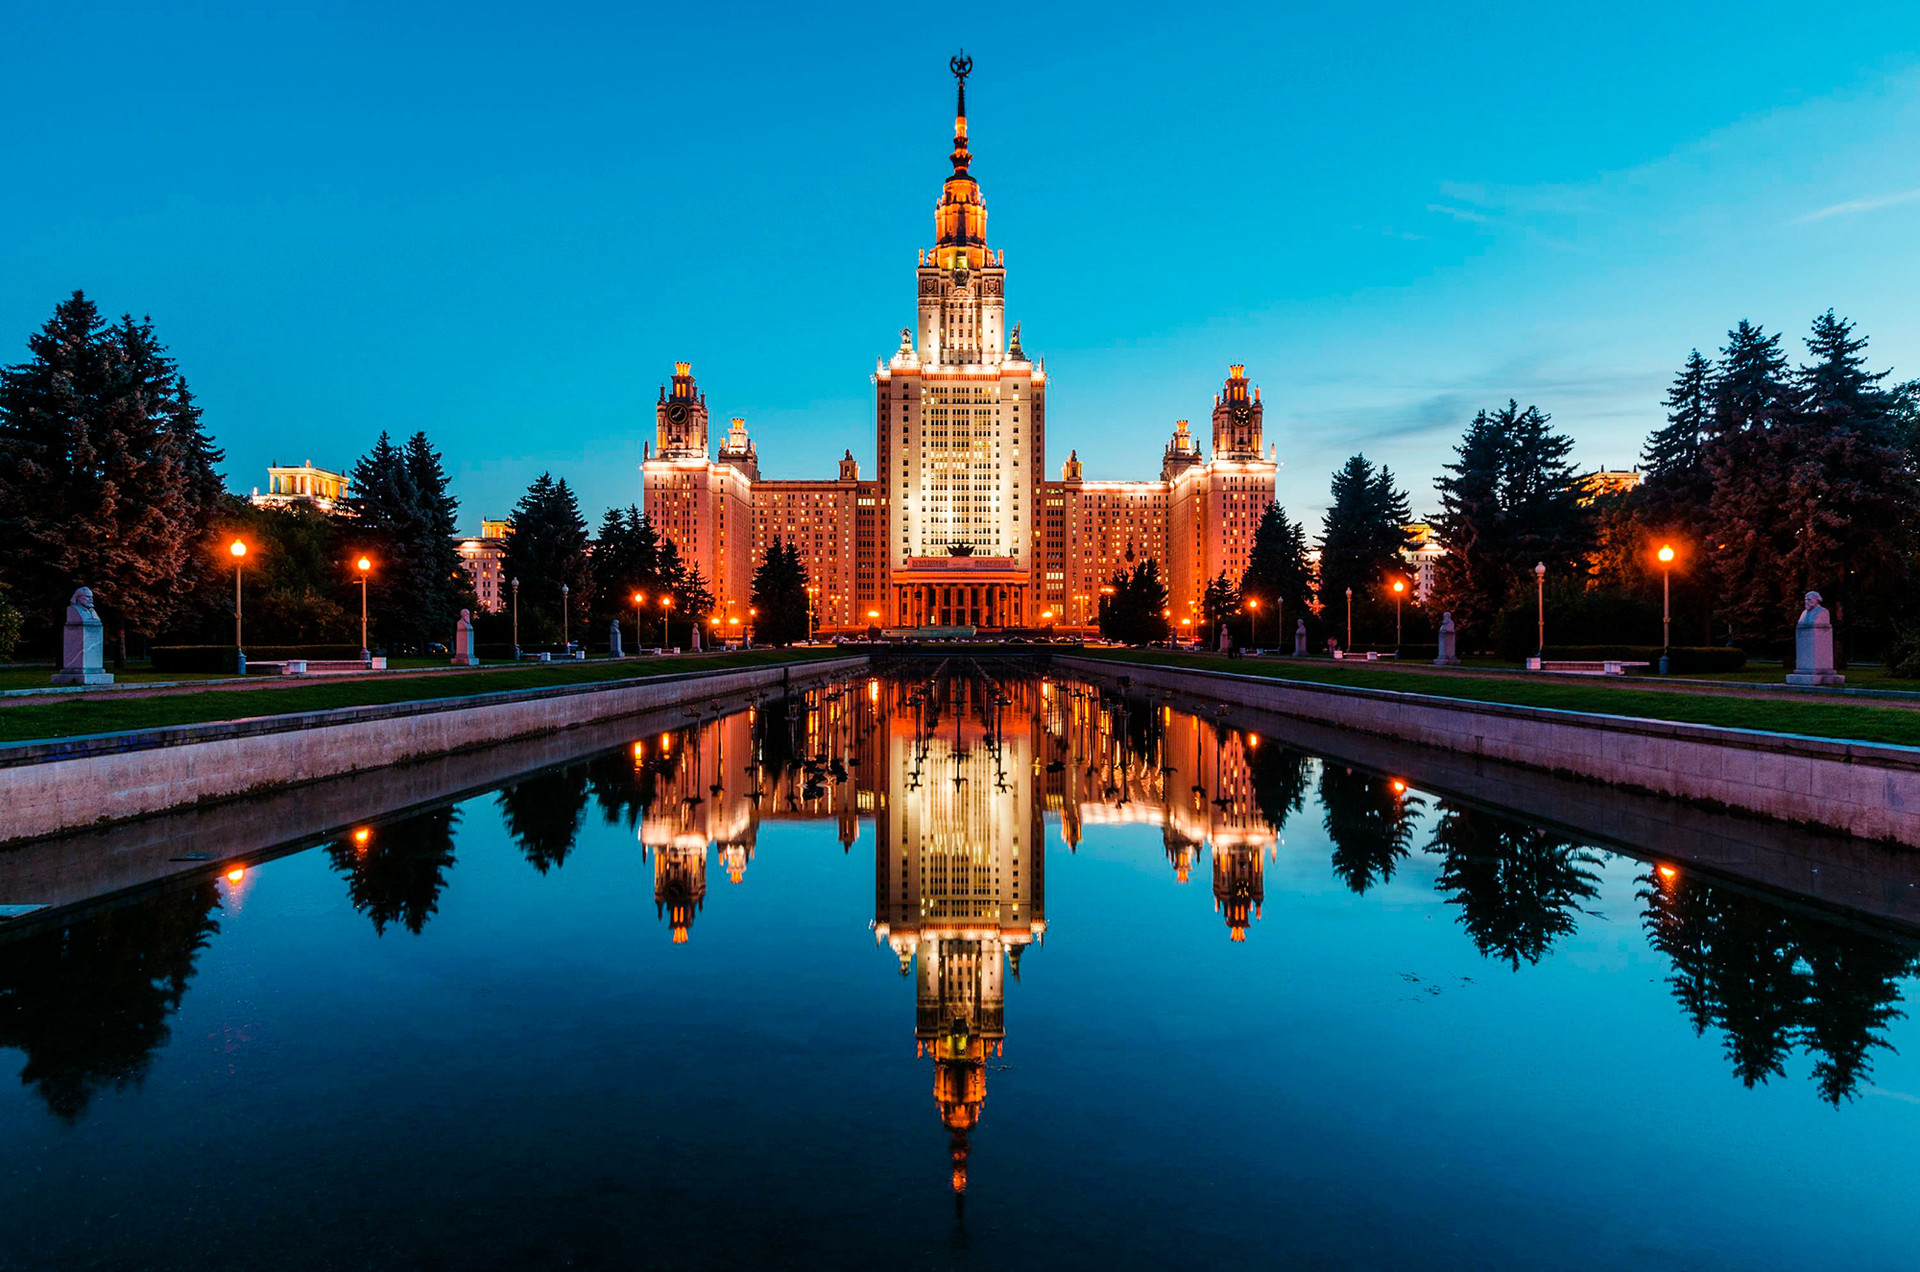 Moscow State University building